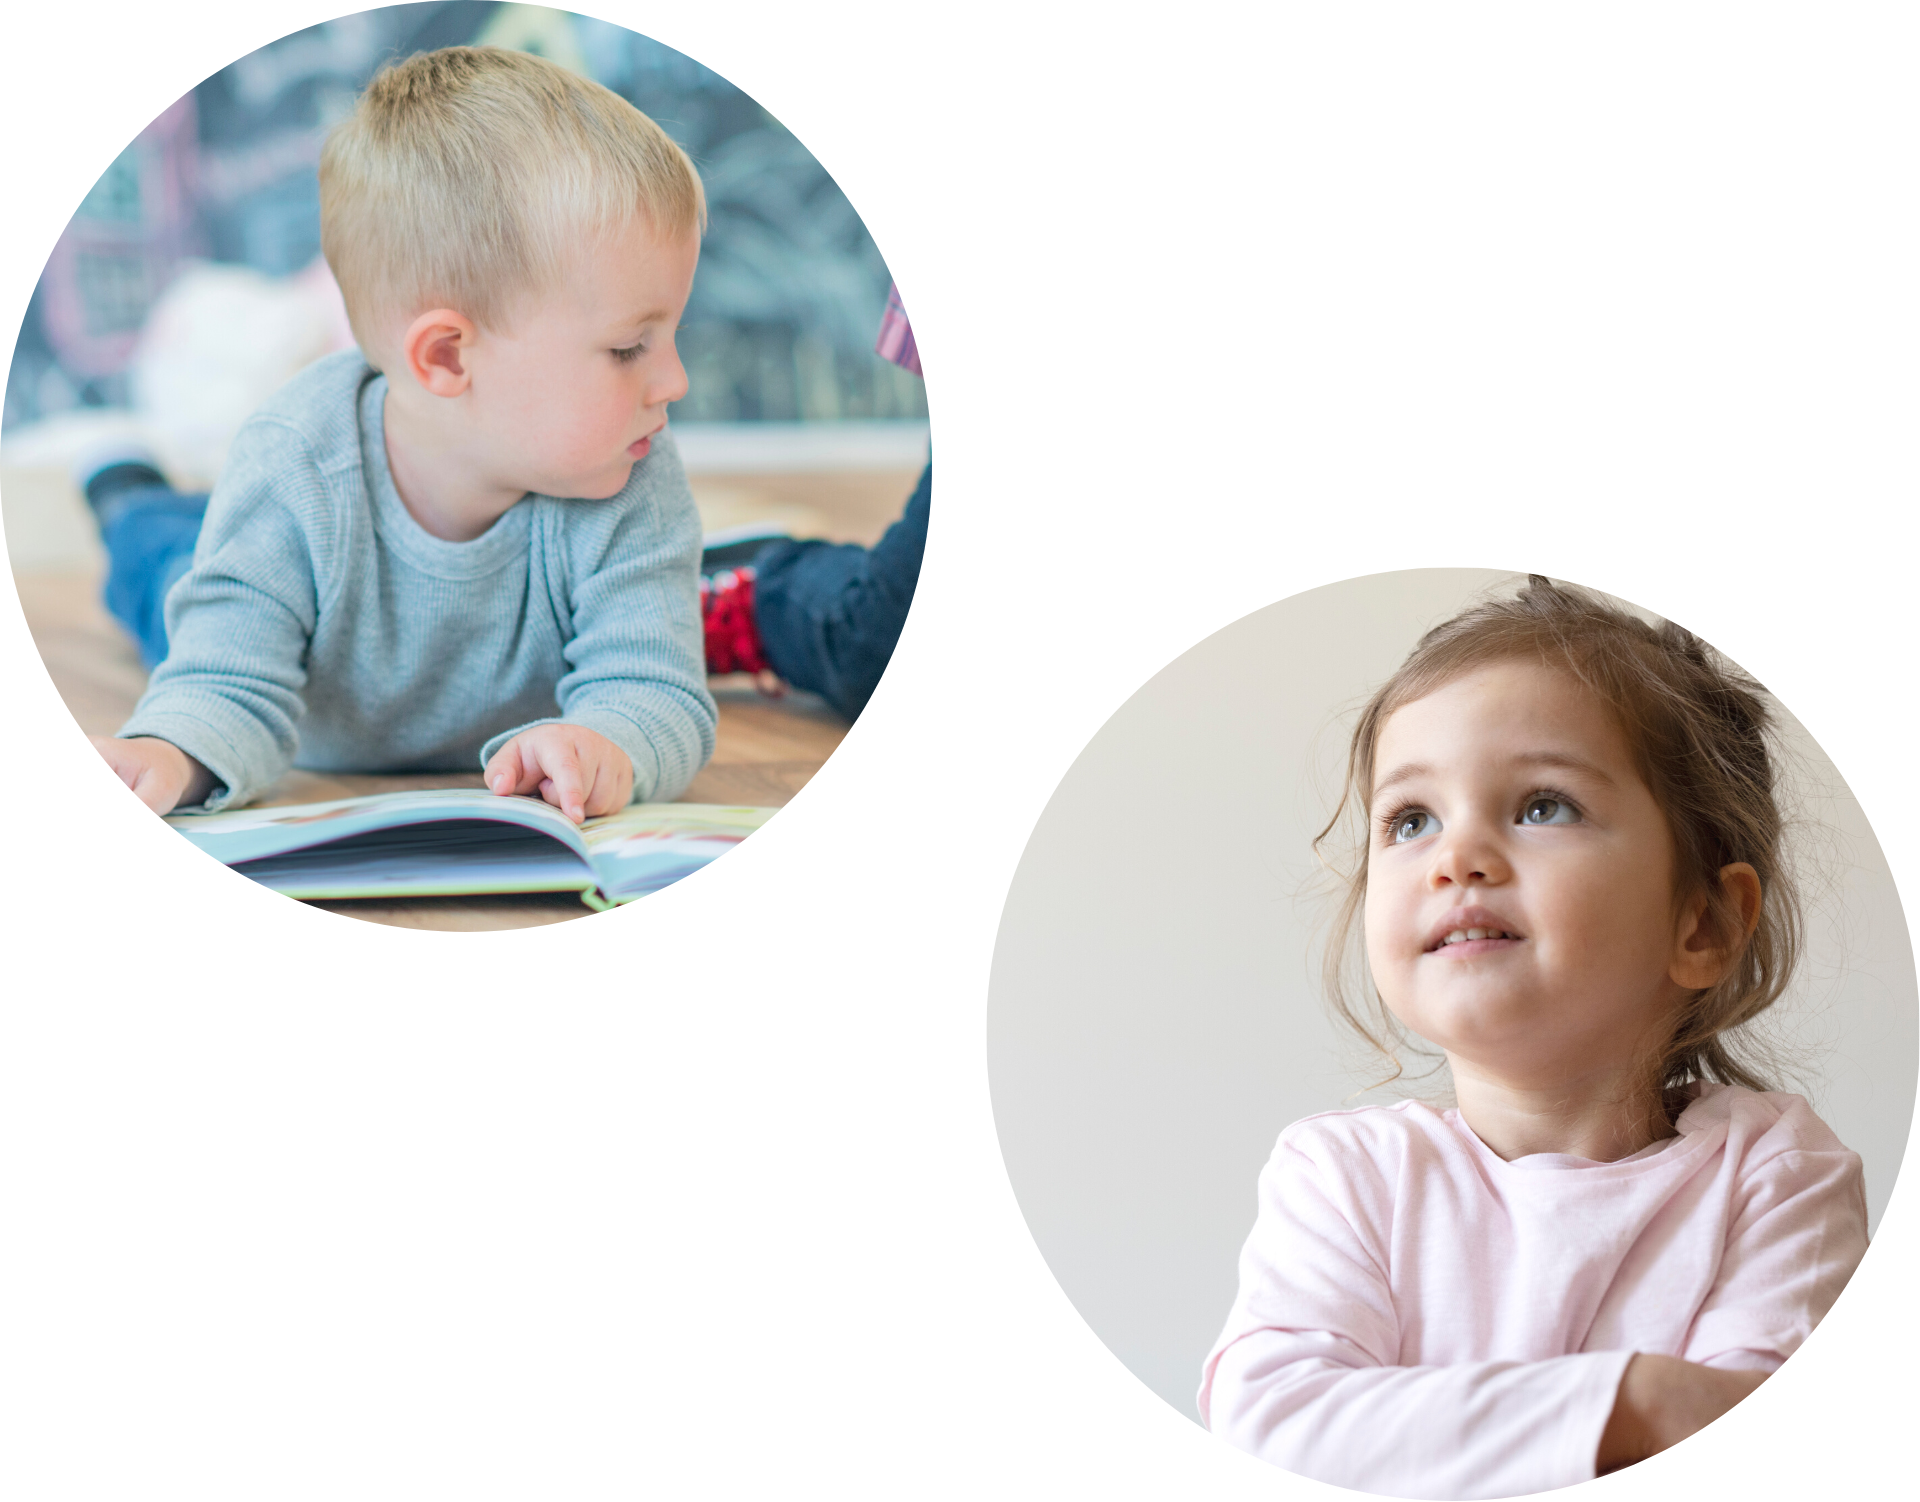 Two circular images of a young boy who opened a book and a young girl looking up indoors in a nursery